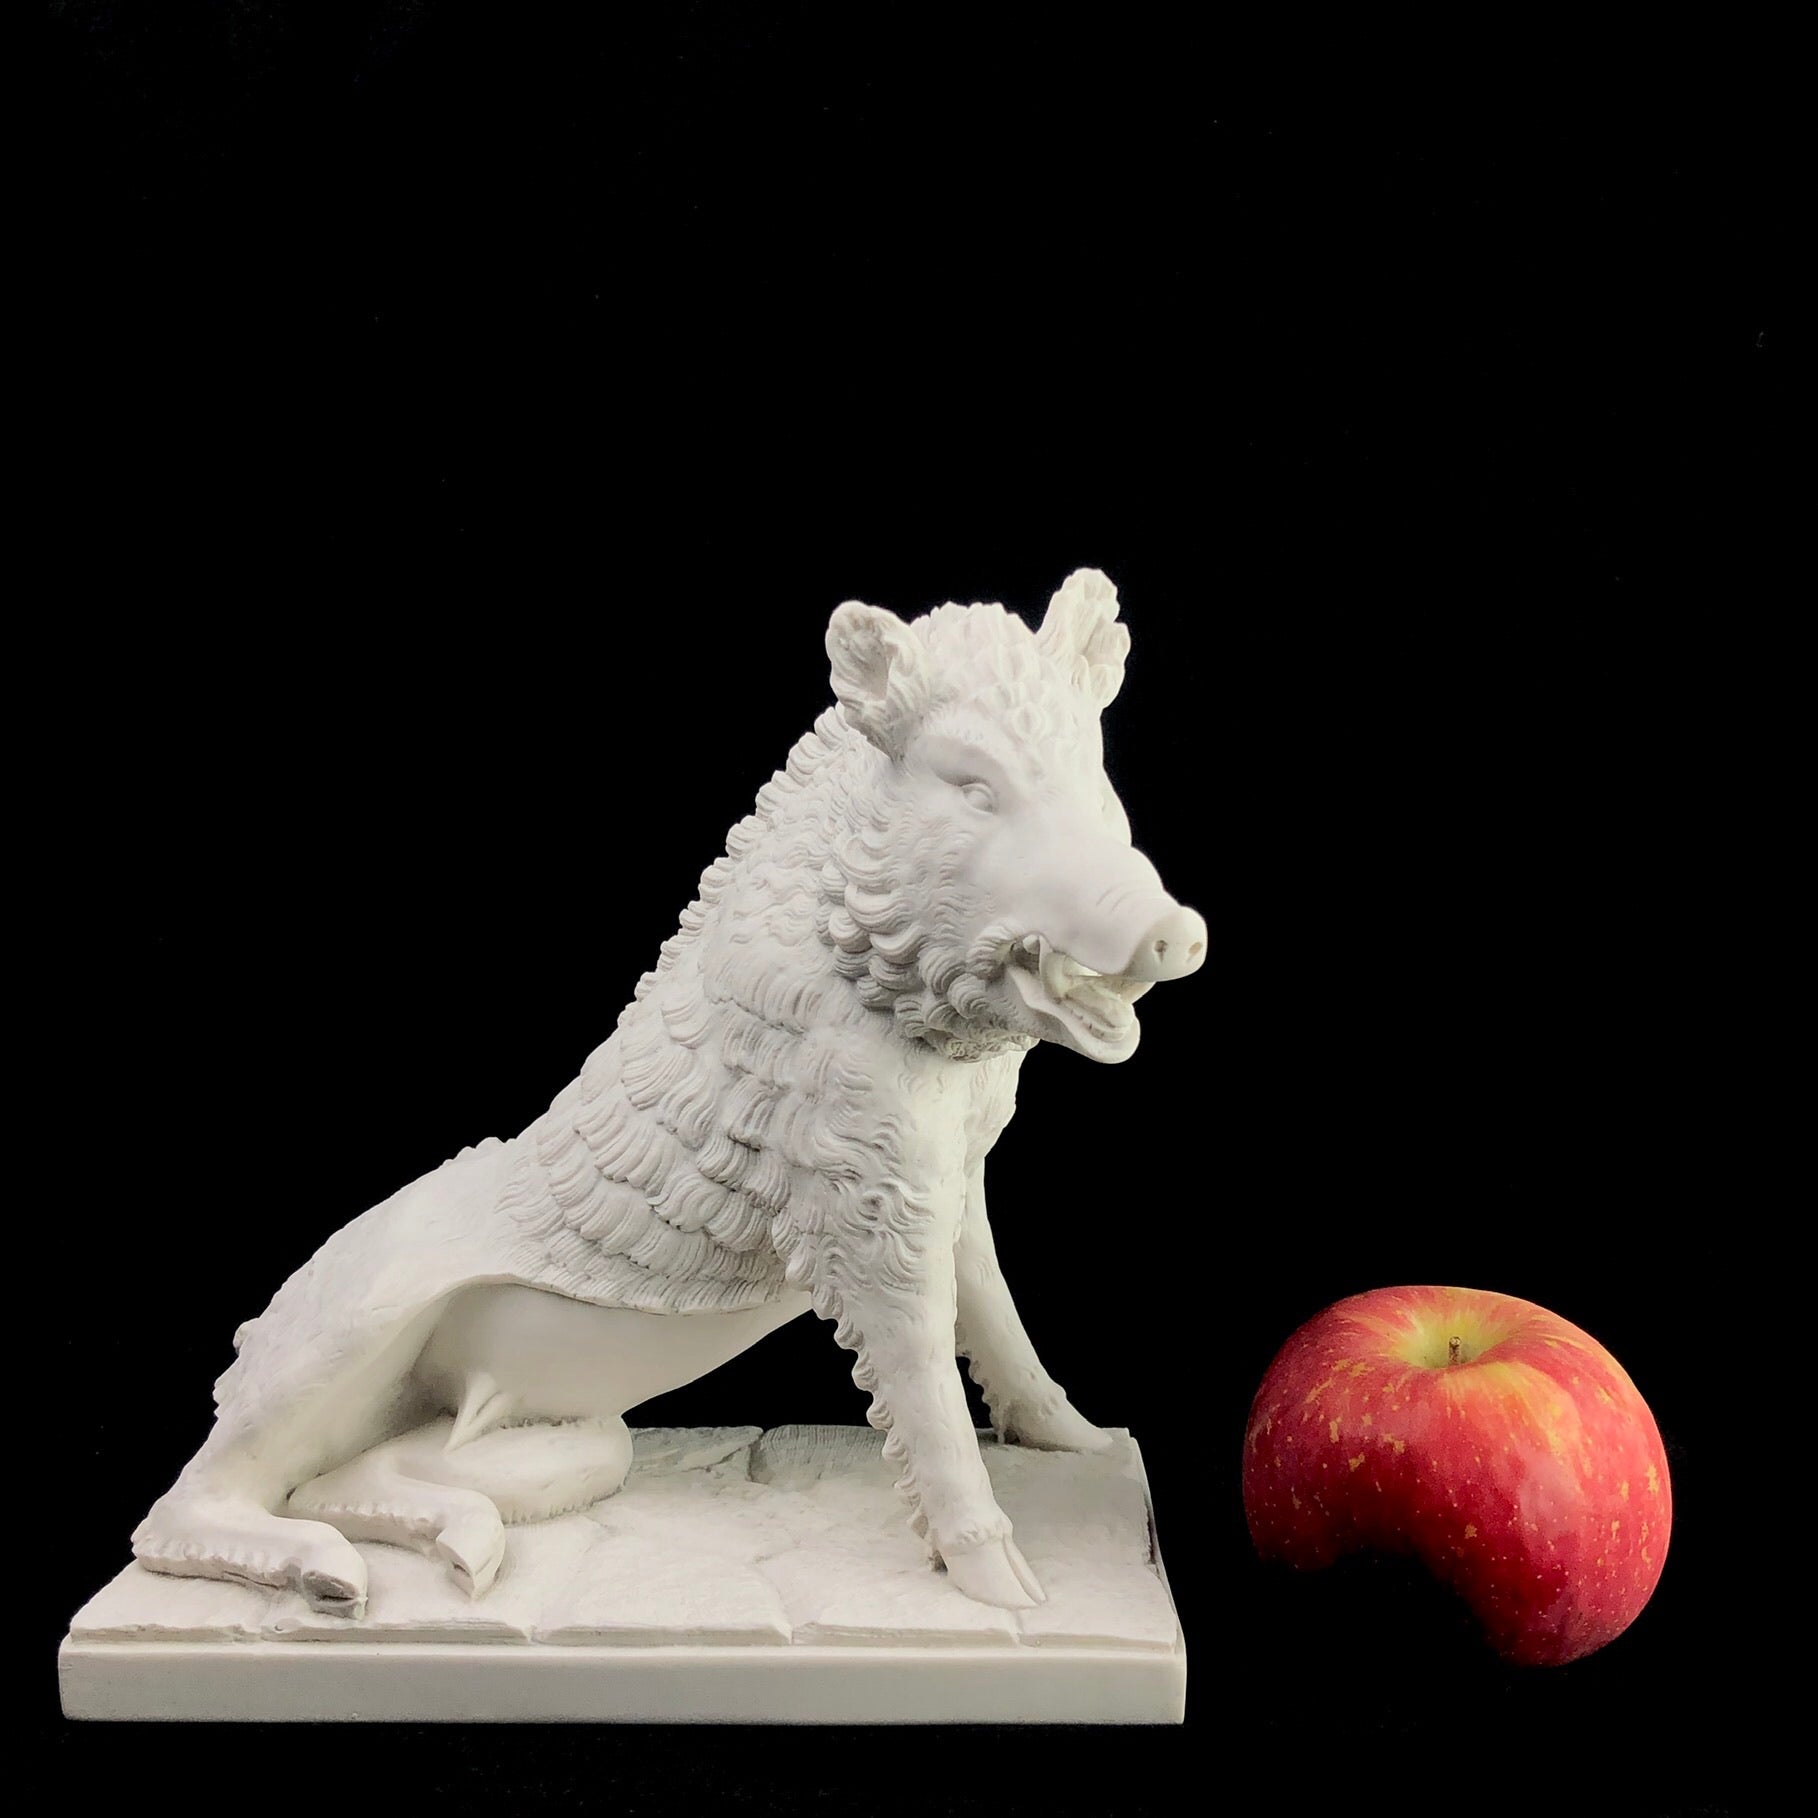 Marble Boar Sculpture next to apple for size reference